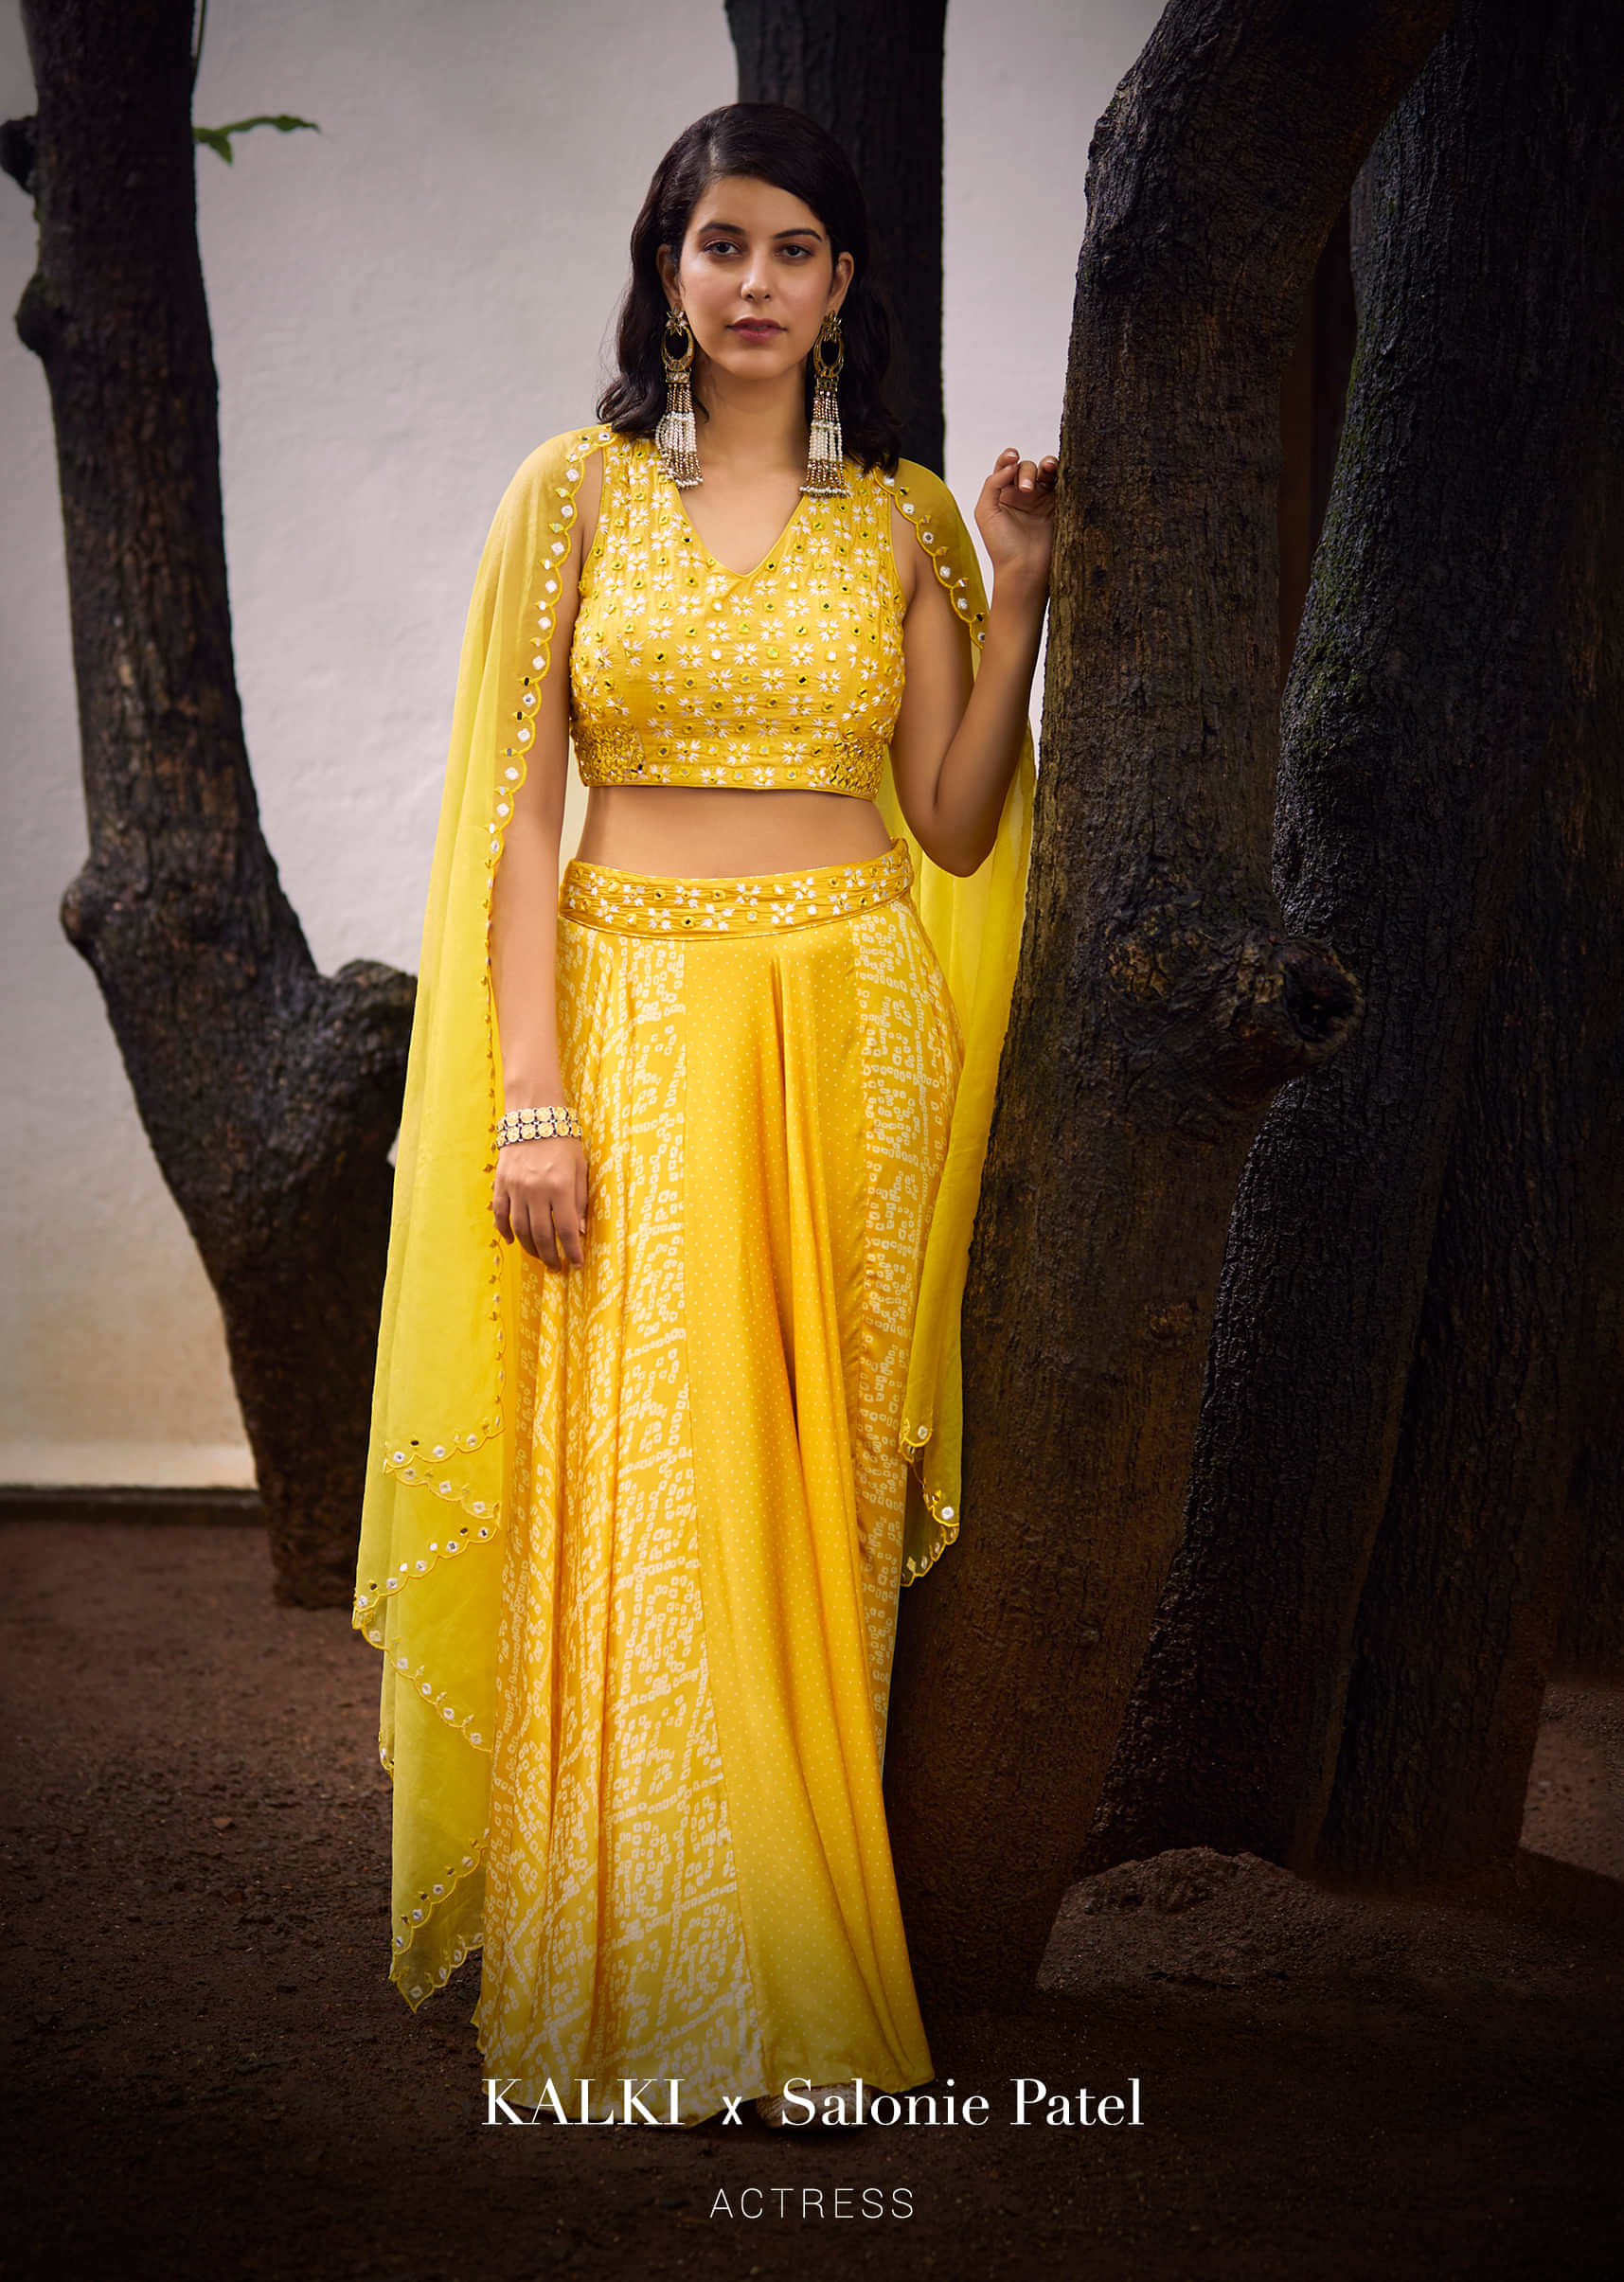 Daffodil Yellow Skirt In Satin Blend With Bandhani Print And Abla Embroidered Crop Top 